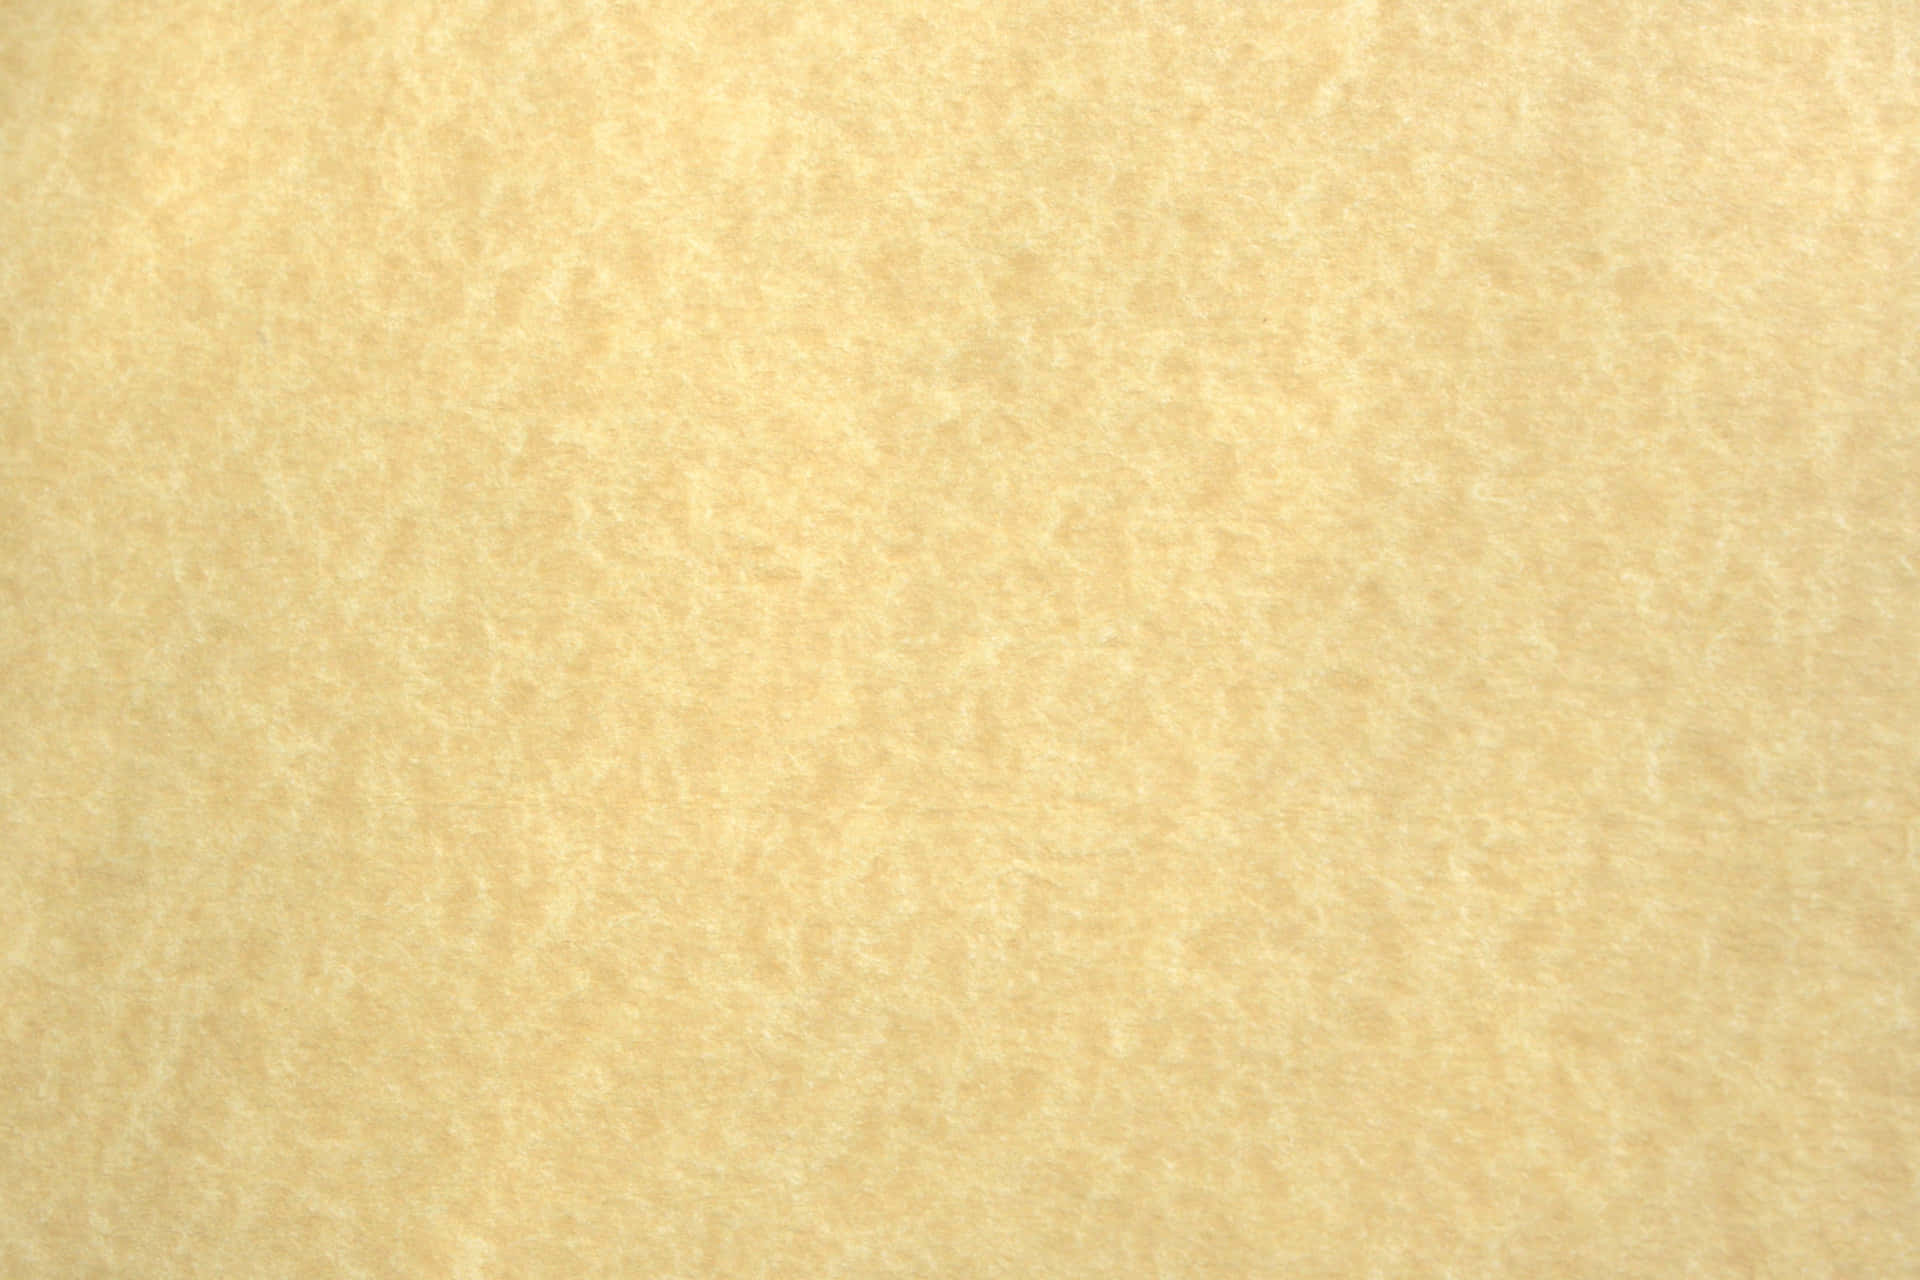 Rough Wall Texture Cream Background